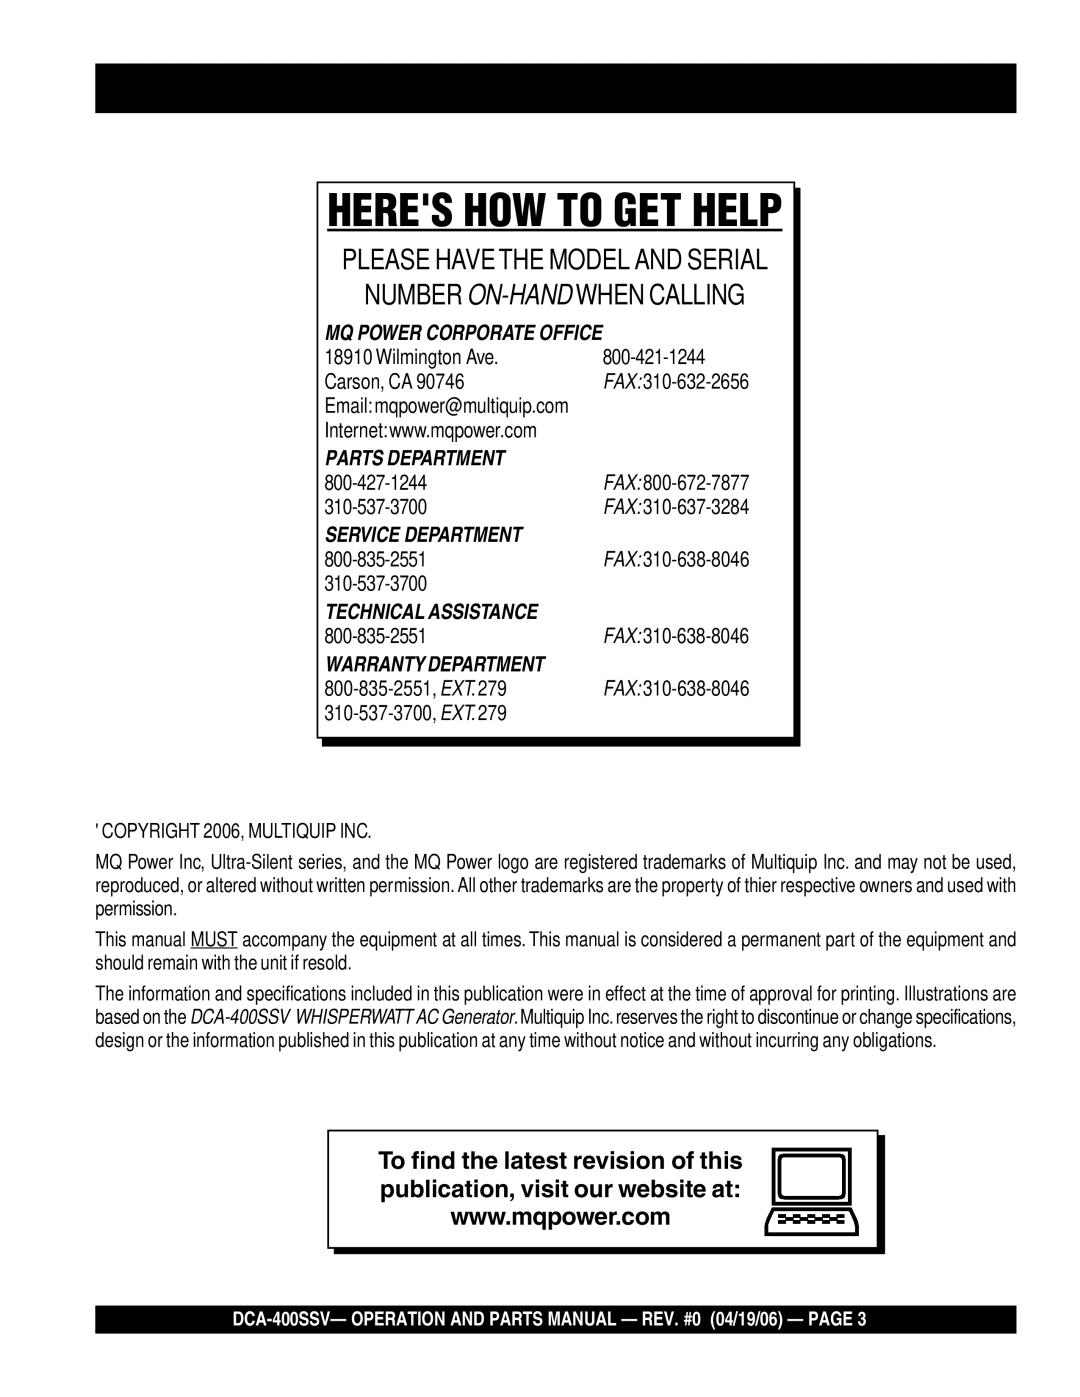 Multiquip DCA-400SSV operation manual Heres HOW to GET Help, Wilmington Ave Carson, CA 